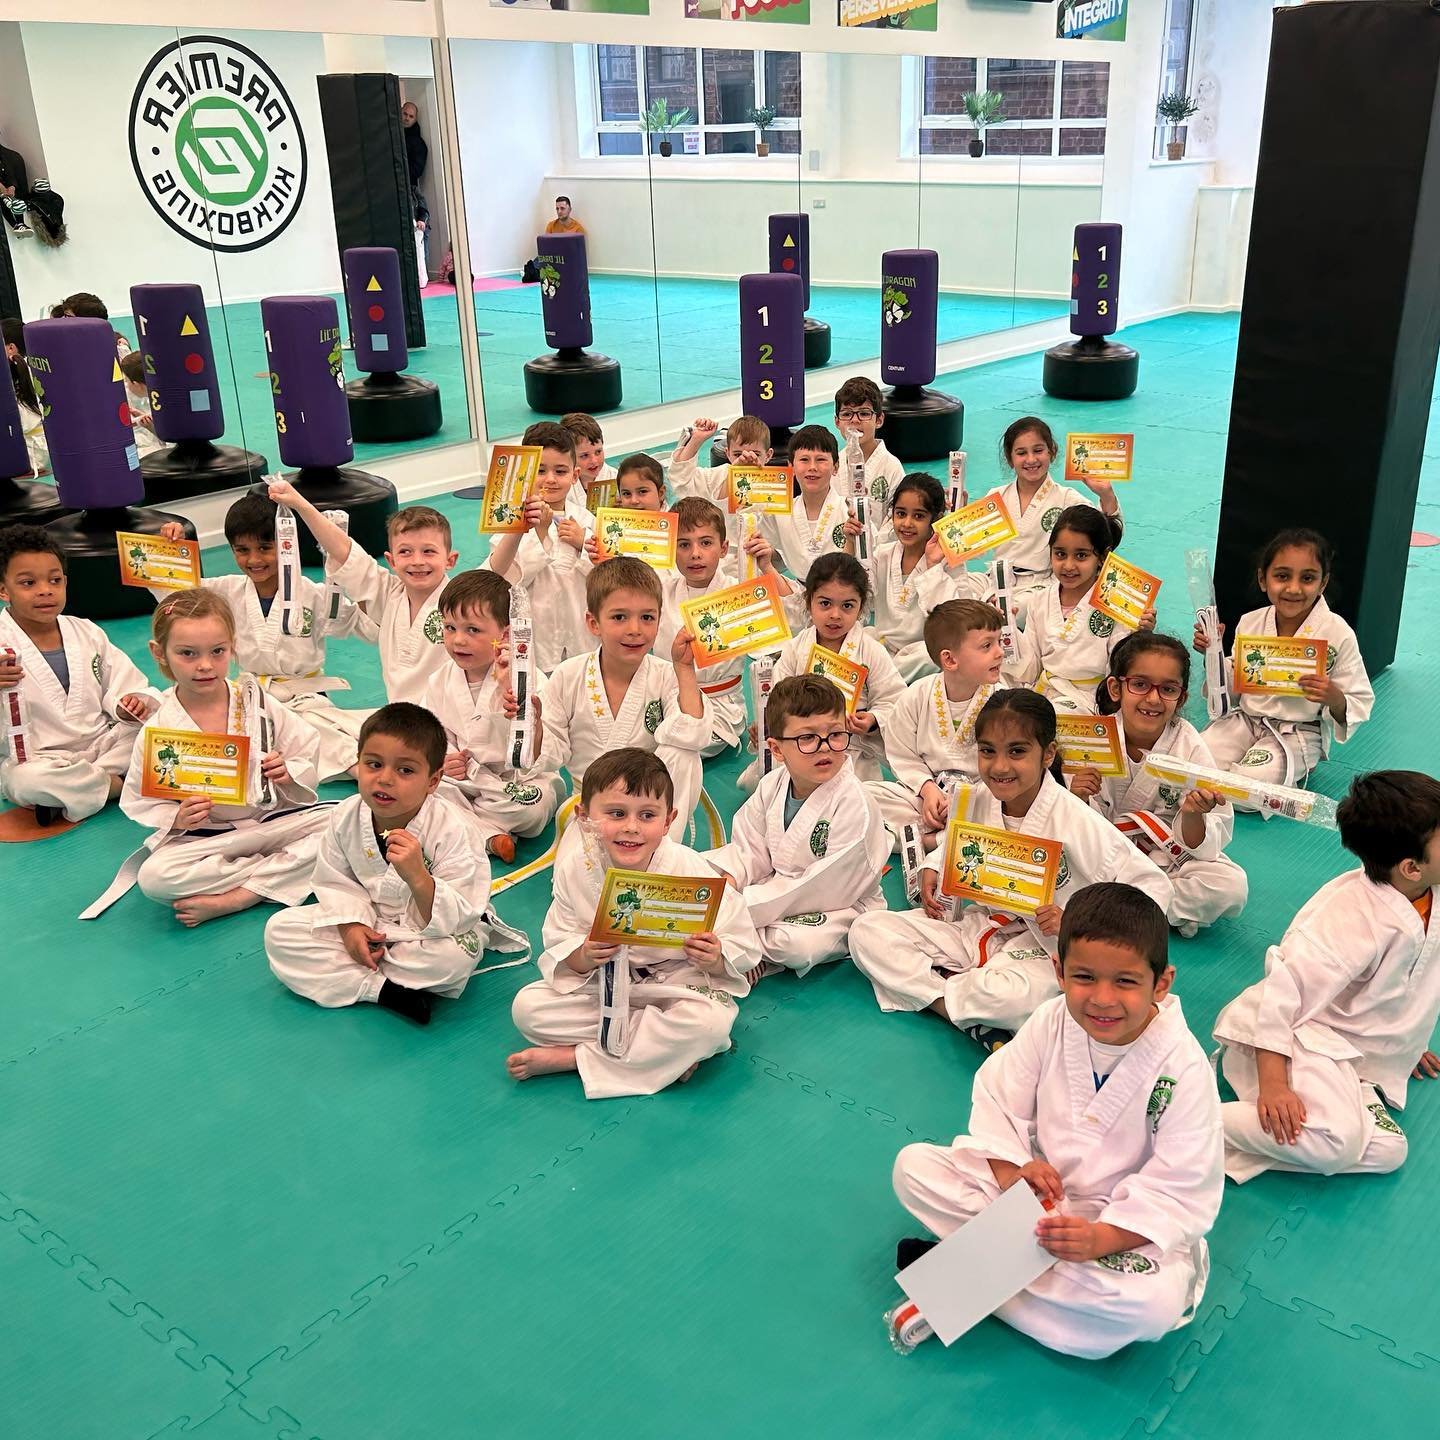 Congratulations to our dragon graders this week, you have impressed us all with your balance and coordination! A massive thank you to all our parents at Premier for your commitment and placing your trust in us. We can&rsquo;t wait to see your progres